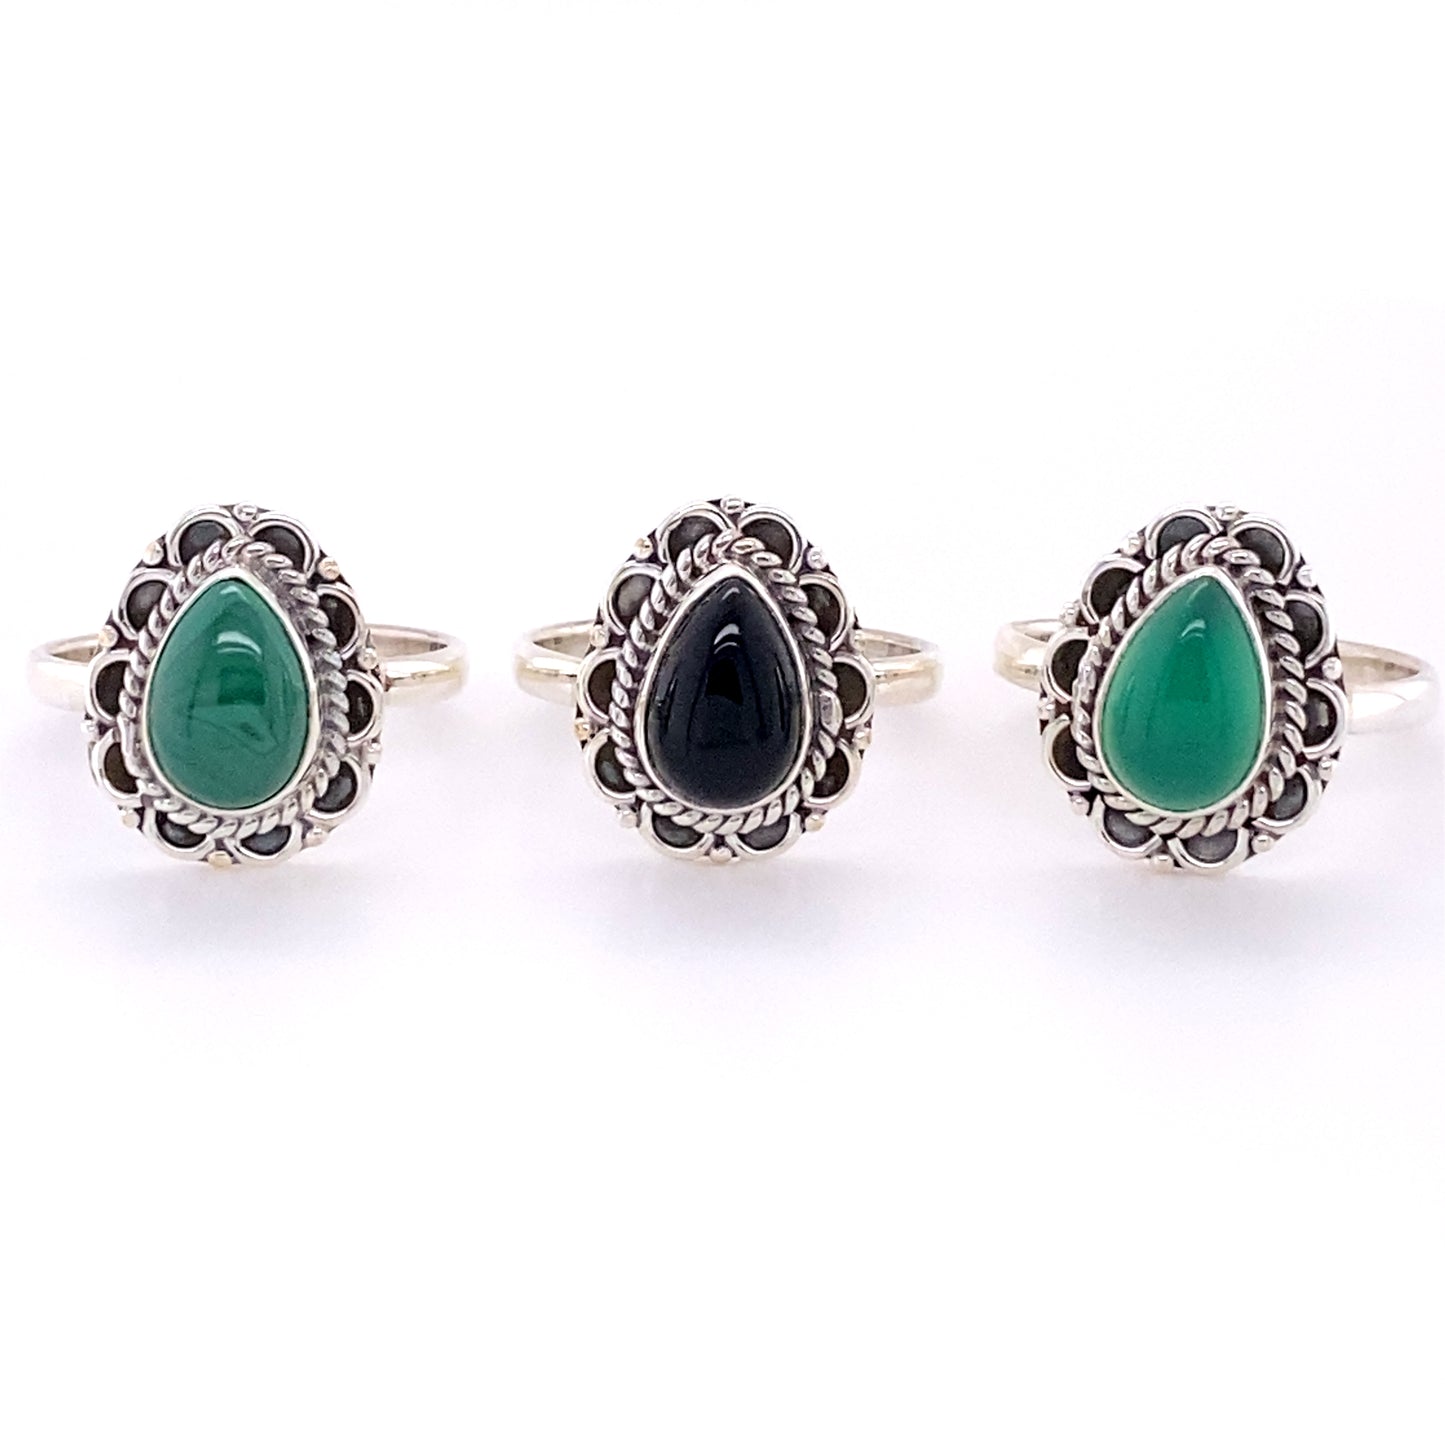 Three Teardrop Gemstone Rings with Flower Filigree Border, perfect for a boho or hippie style.